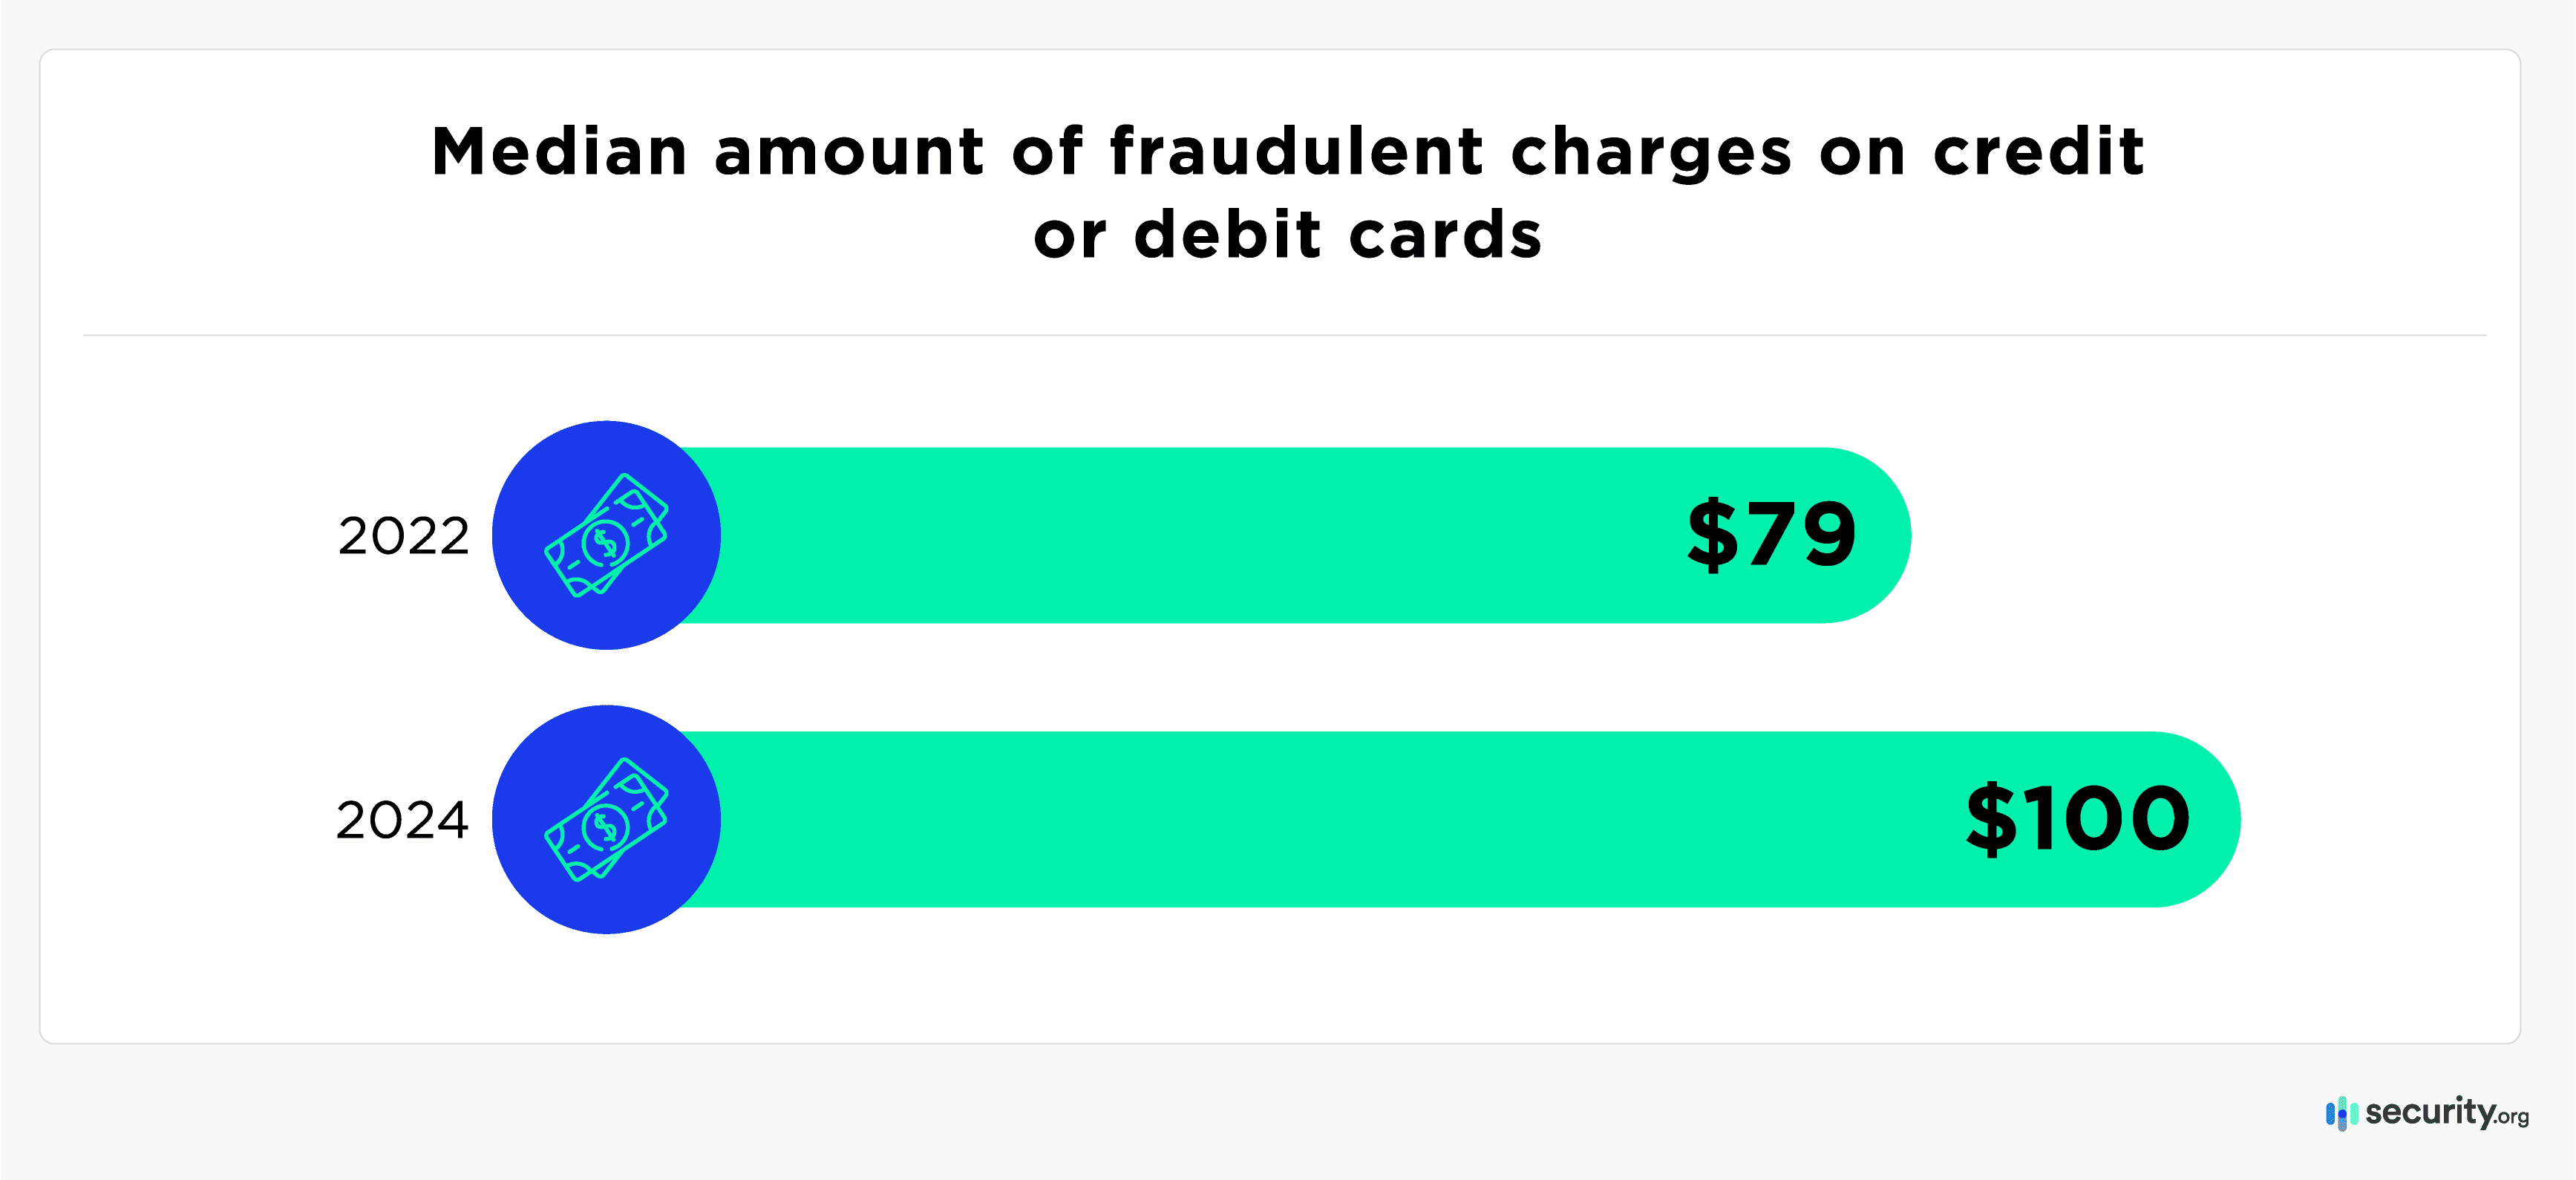 Median amount of fraudulent charges on credit or debit cards